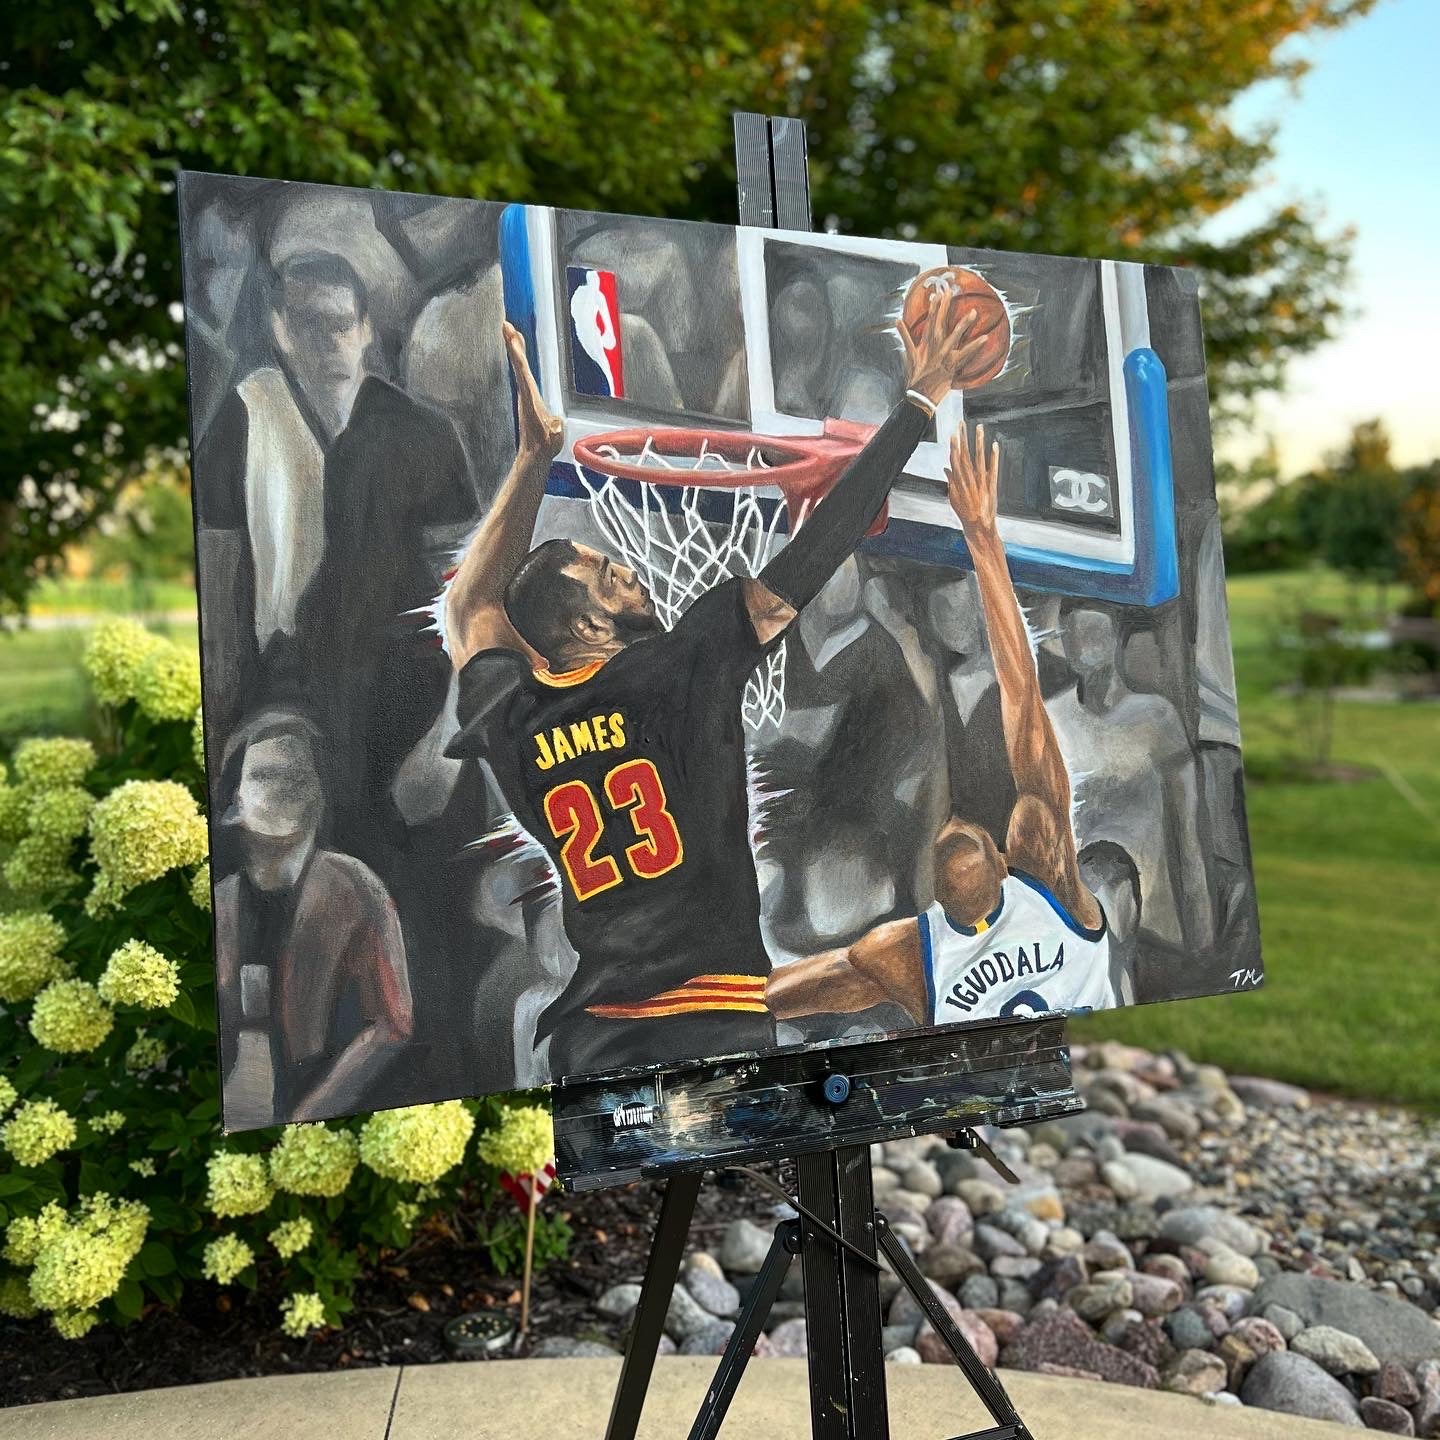 Lebron "Blocked By James" - Original Painting 40x30 - Tommy Manning Art